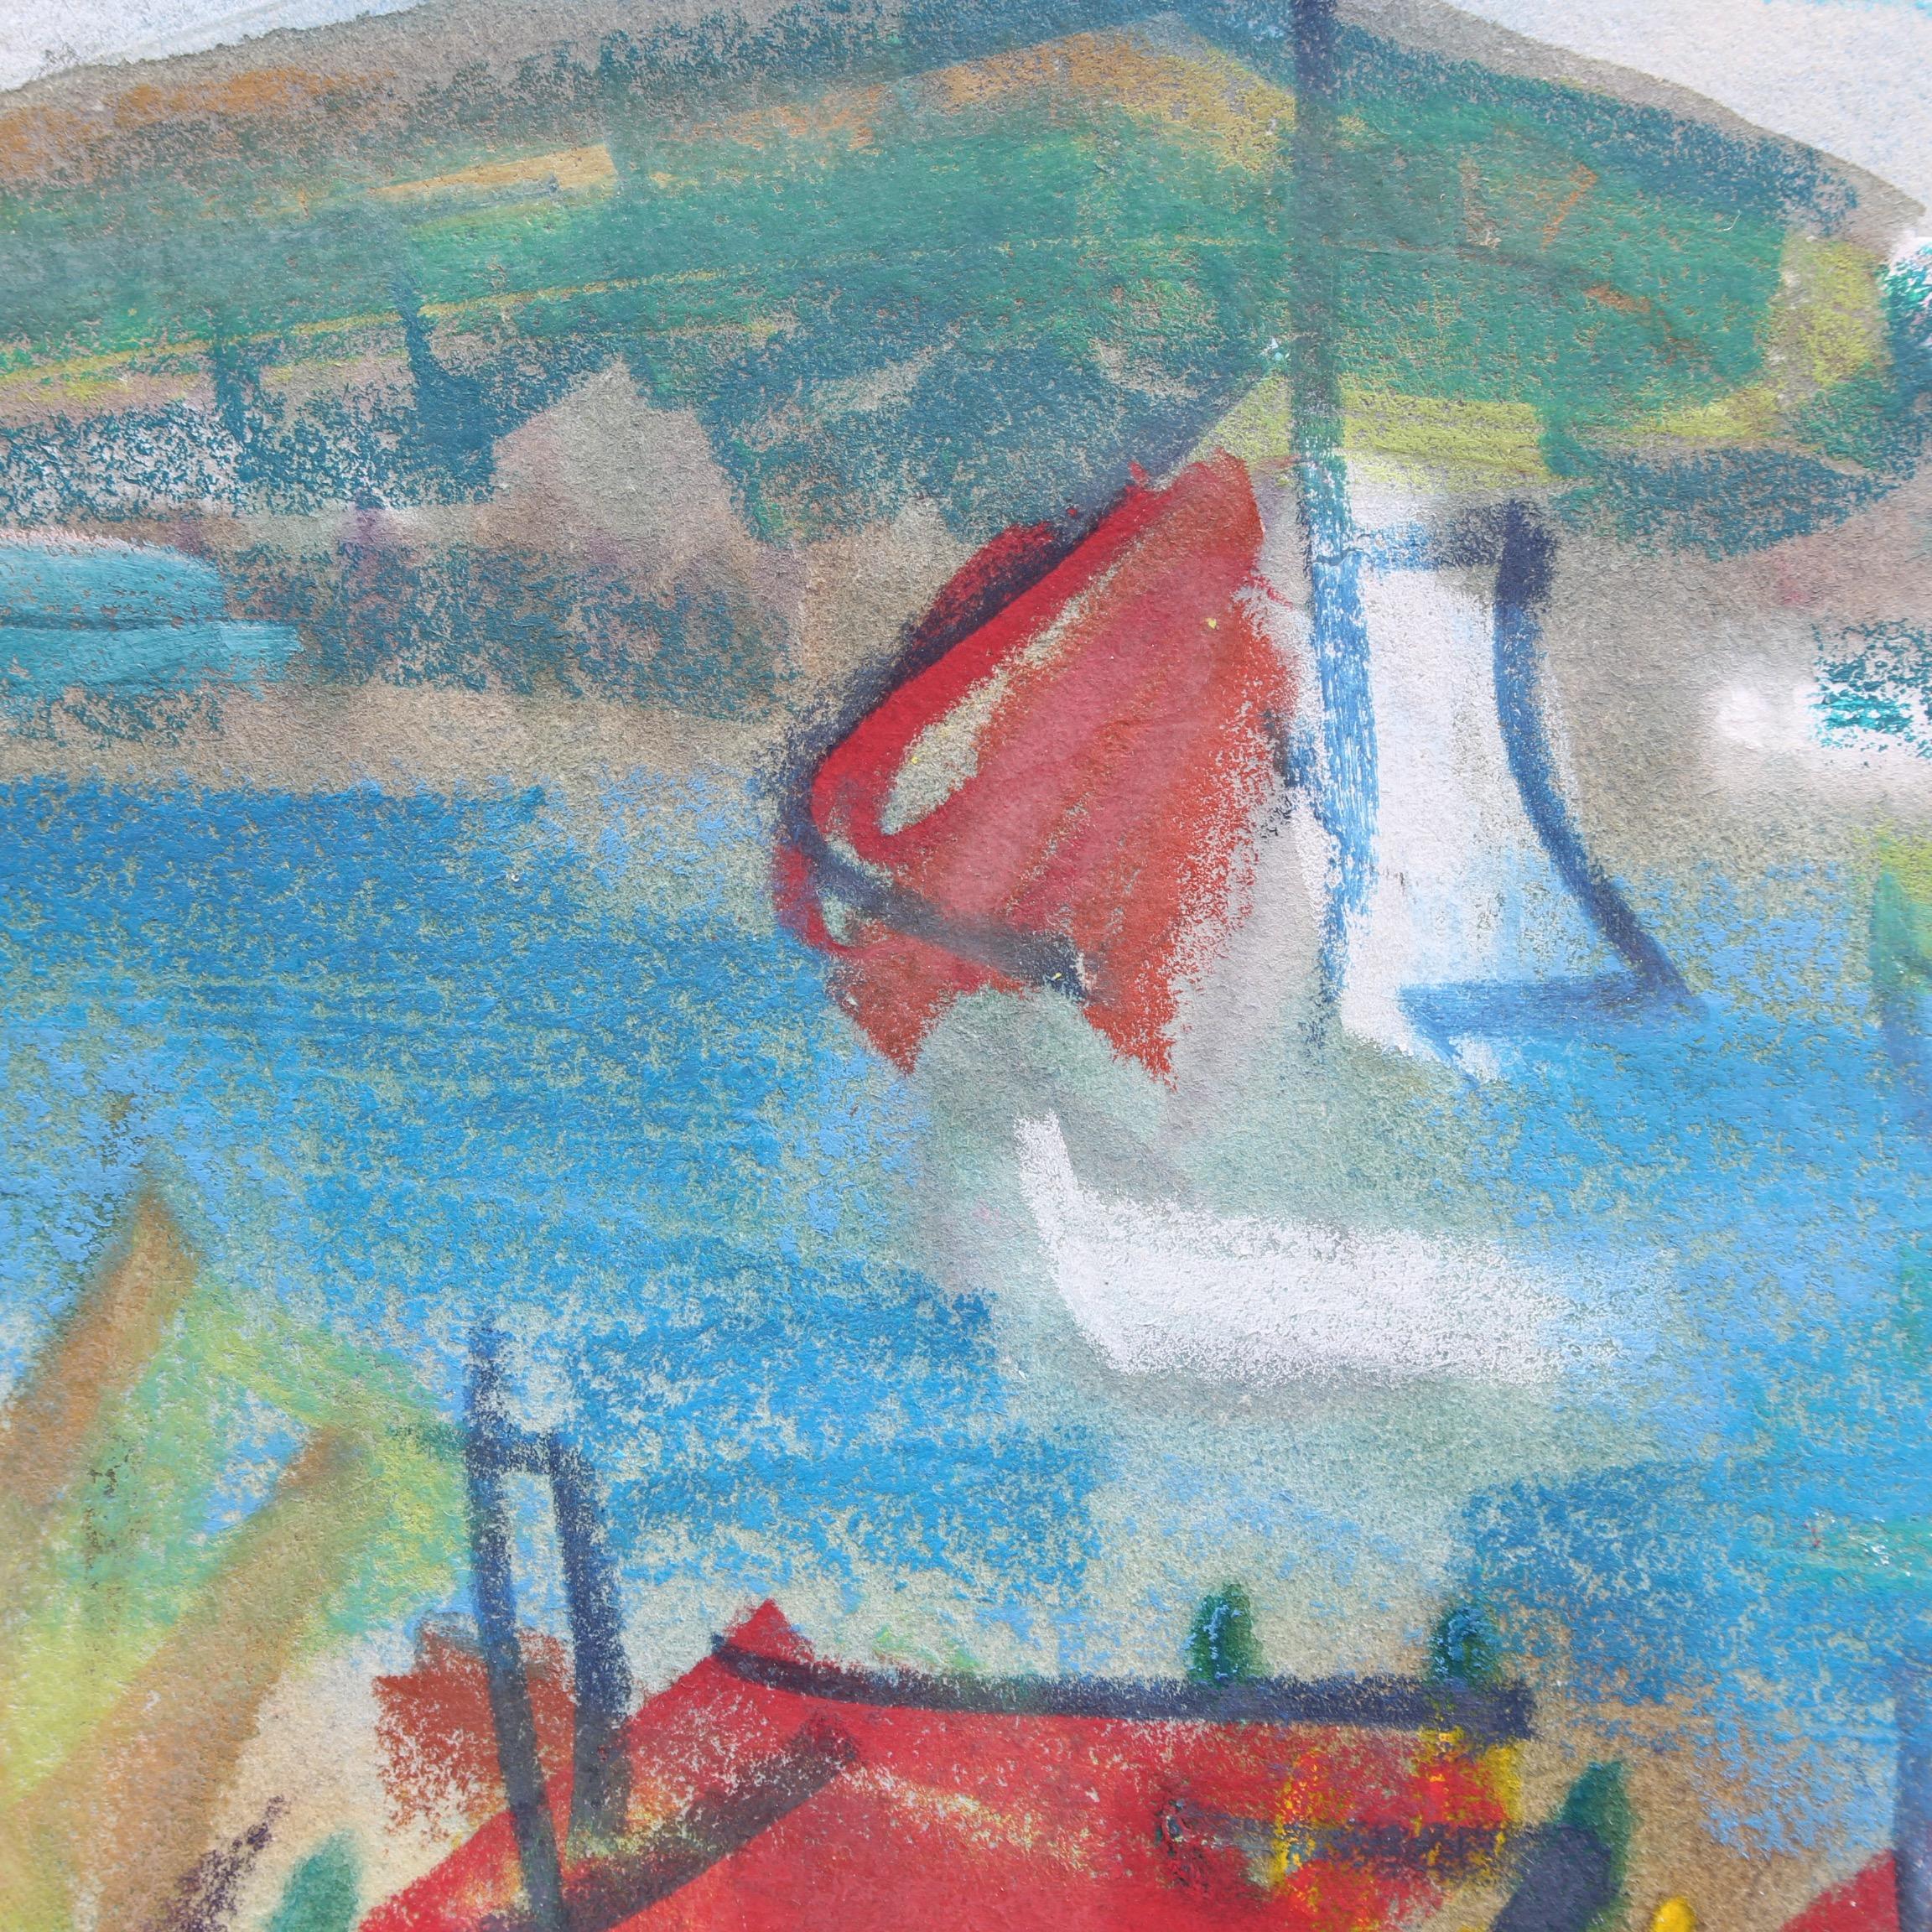 'French Riviera Scene II' gouache on fine art paper, by Roland DuBuc (circa 1960s - 70s). Longtime Riviera resident Somerset Maugham coined the memorable description of the Riviera as 'a sunny place for shady people'. He wrote further, 'The shores